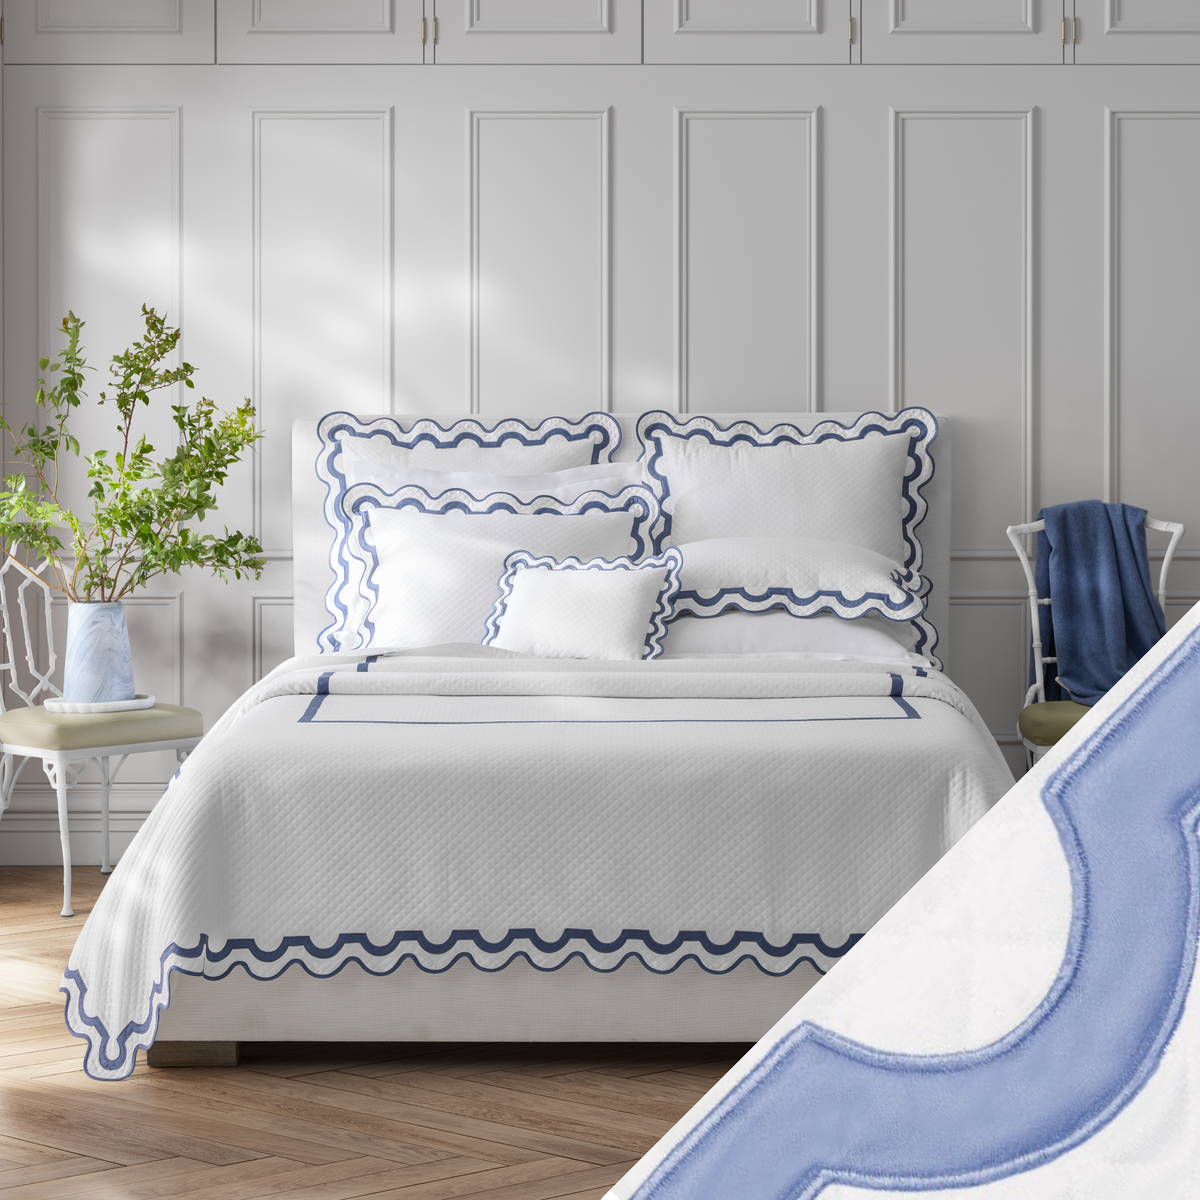 Full Bed Dressed in Matouk Mirasol Matelassé Bedding with Swatch in Azure